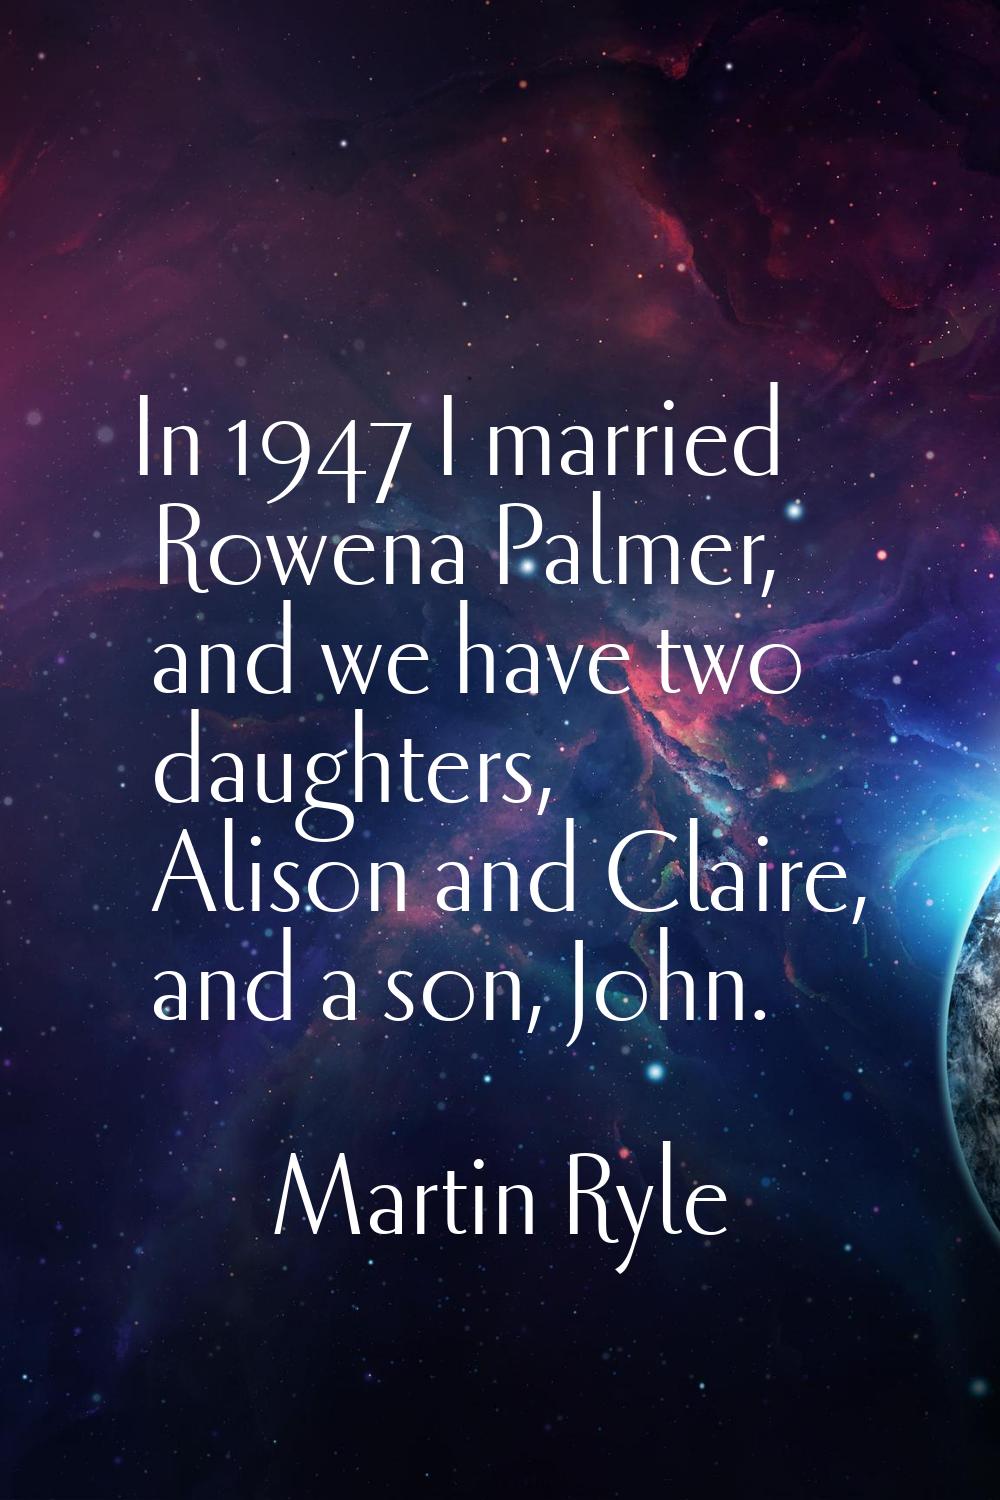 In 1947 I married Rowena Palmer, and we have two daughters, Alison and Claire, and a son, John.